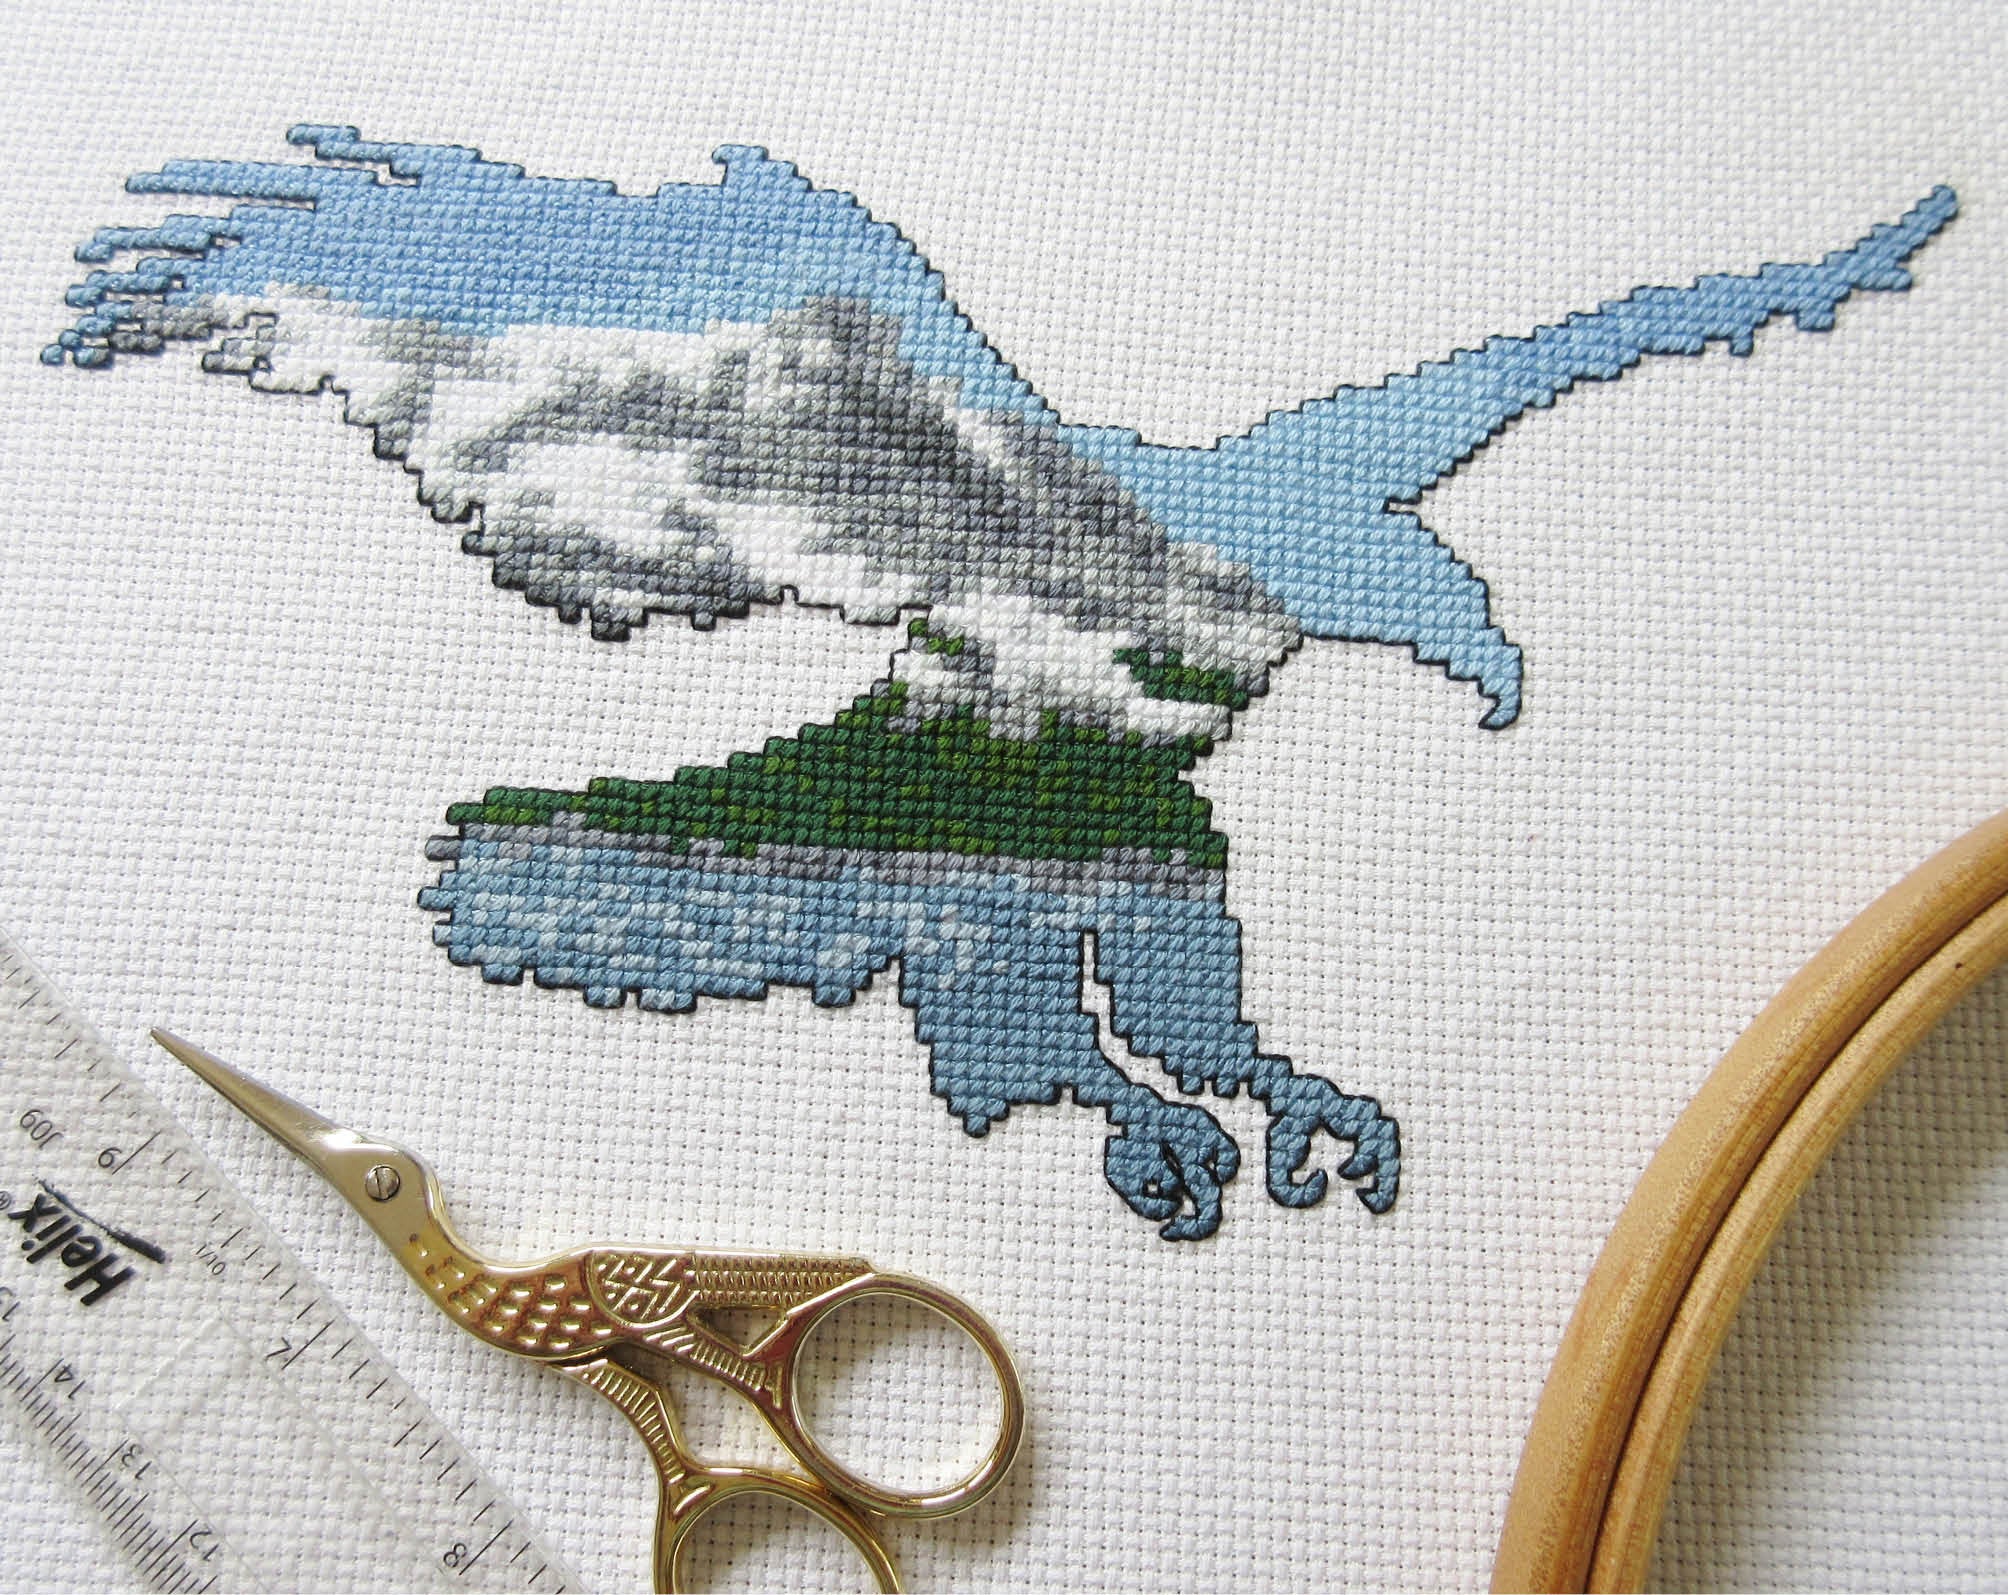 Cross stitch pattern of the silhouette of a bald eagle filled with a scene of snow covered mountains, forest and a lake. Stitched piece with props.